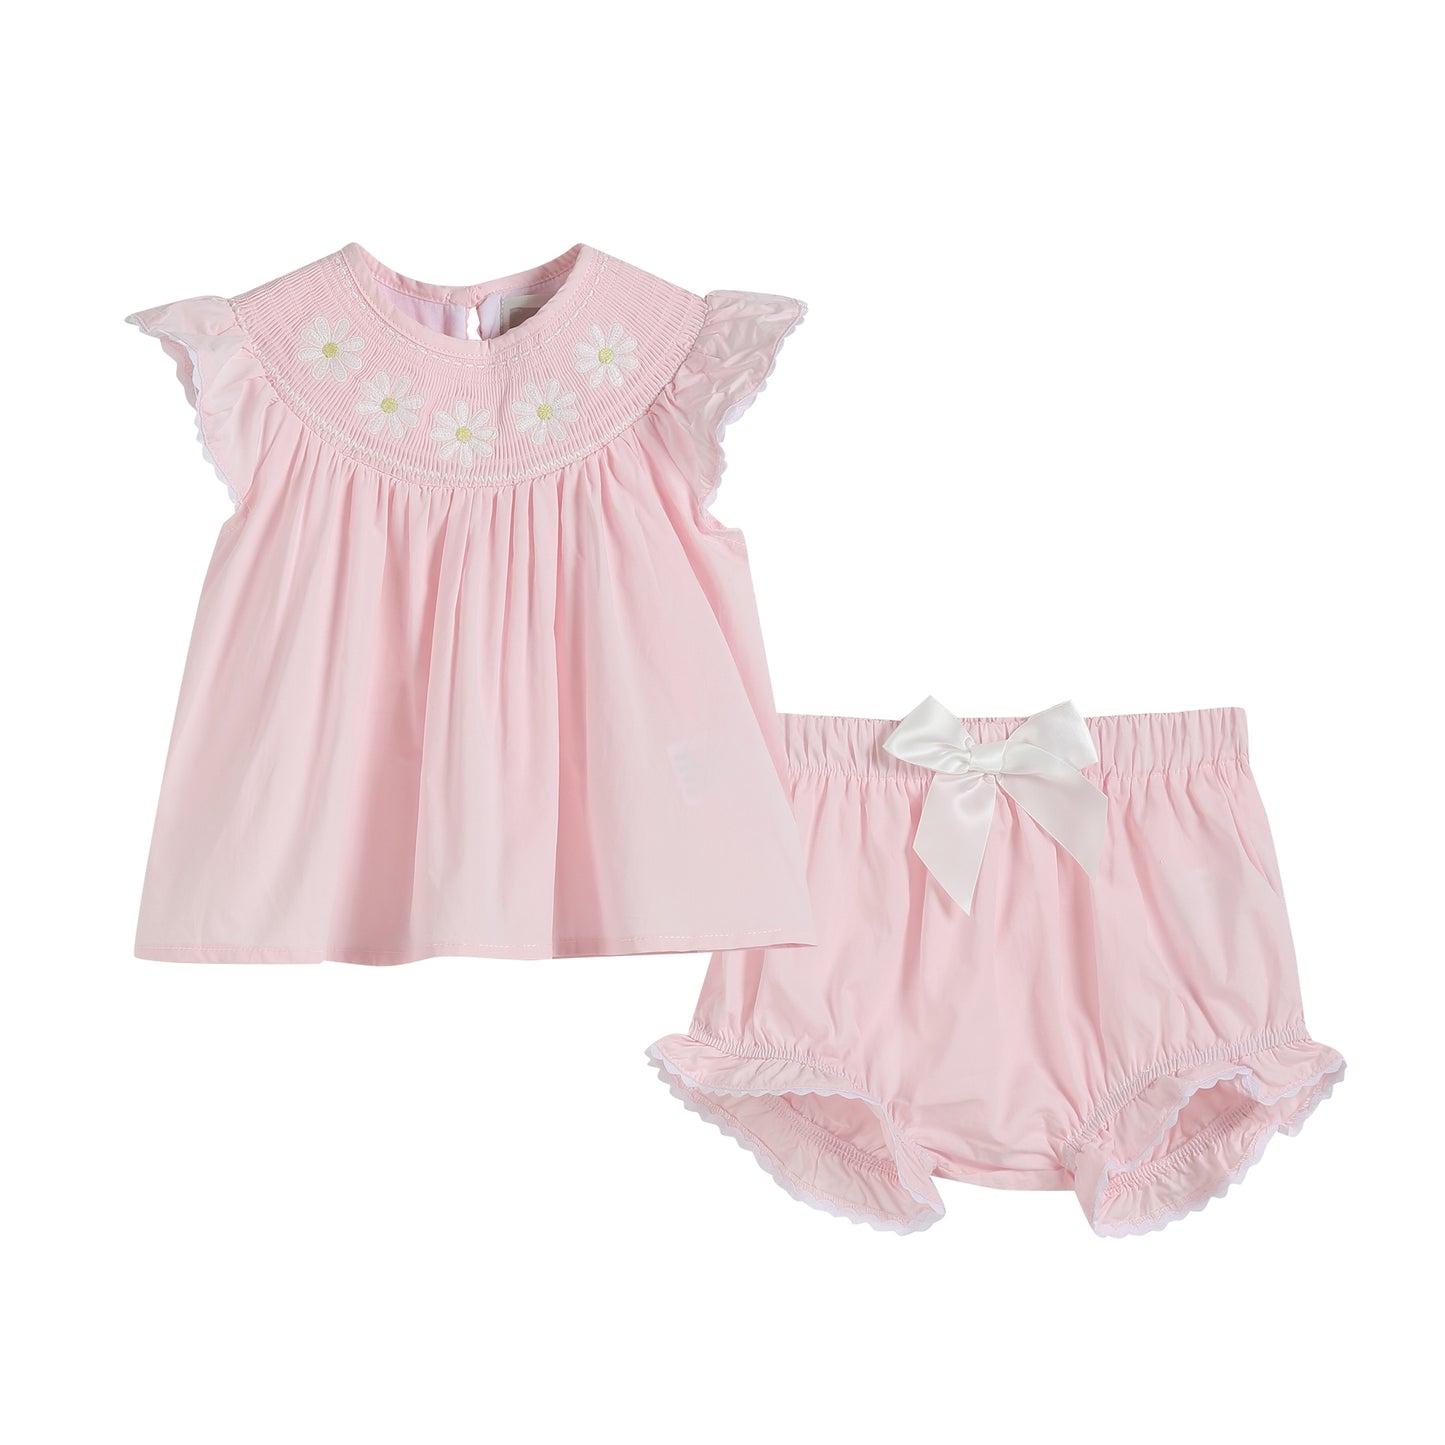 Daisy Smocked Top and Bloomer Set  - Doodlebug's Children's Boutique